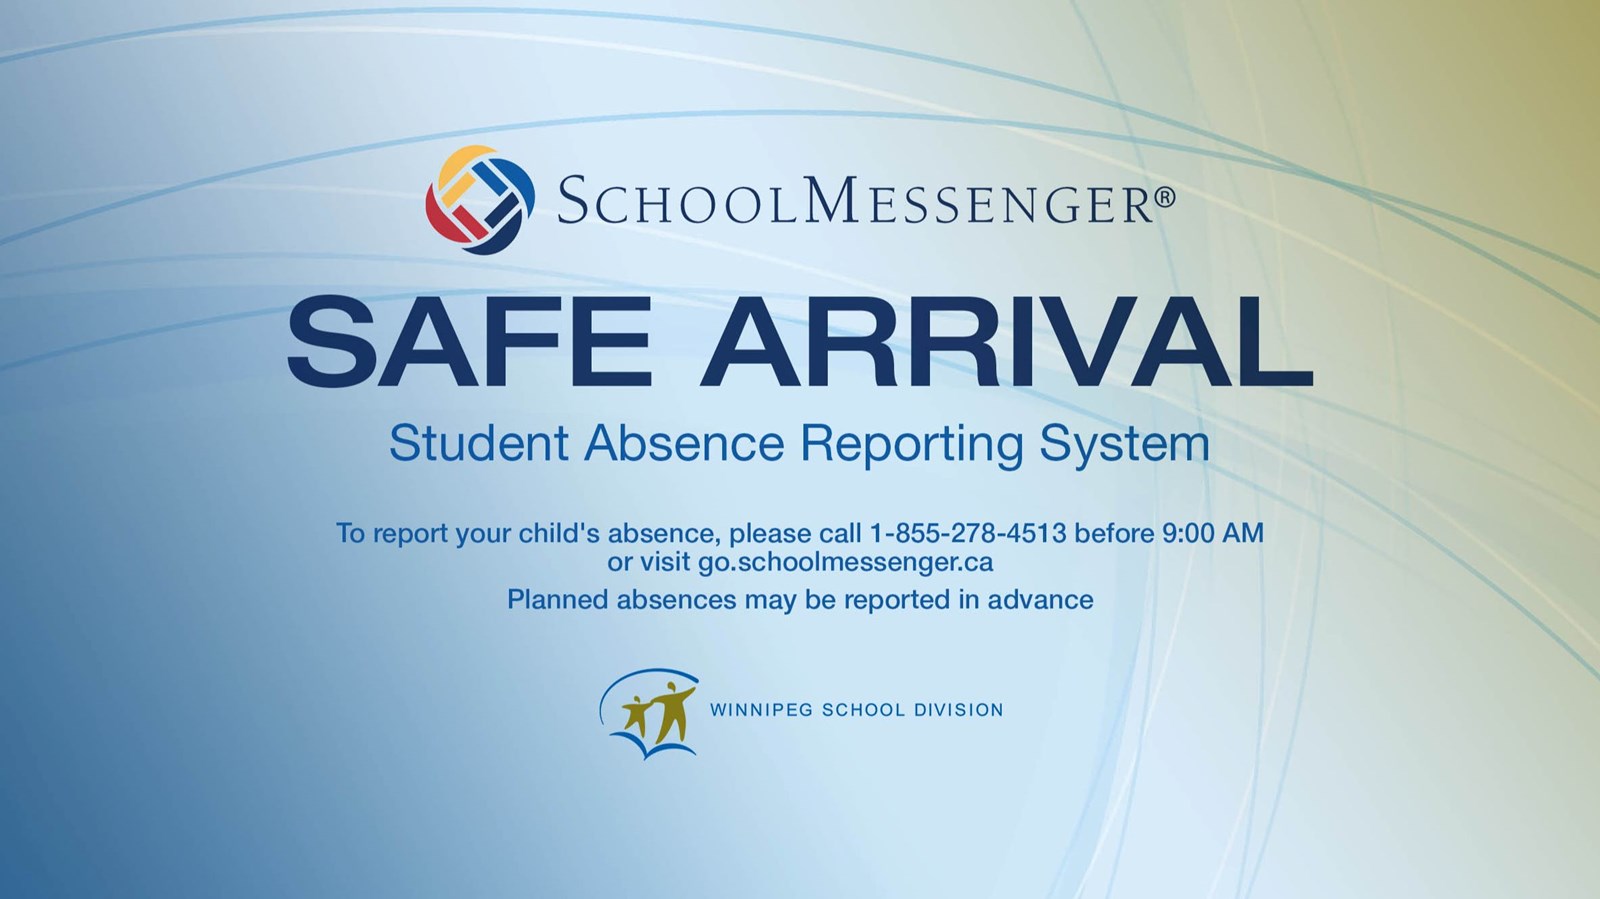 Safe Arrival - Absence Reporting System